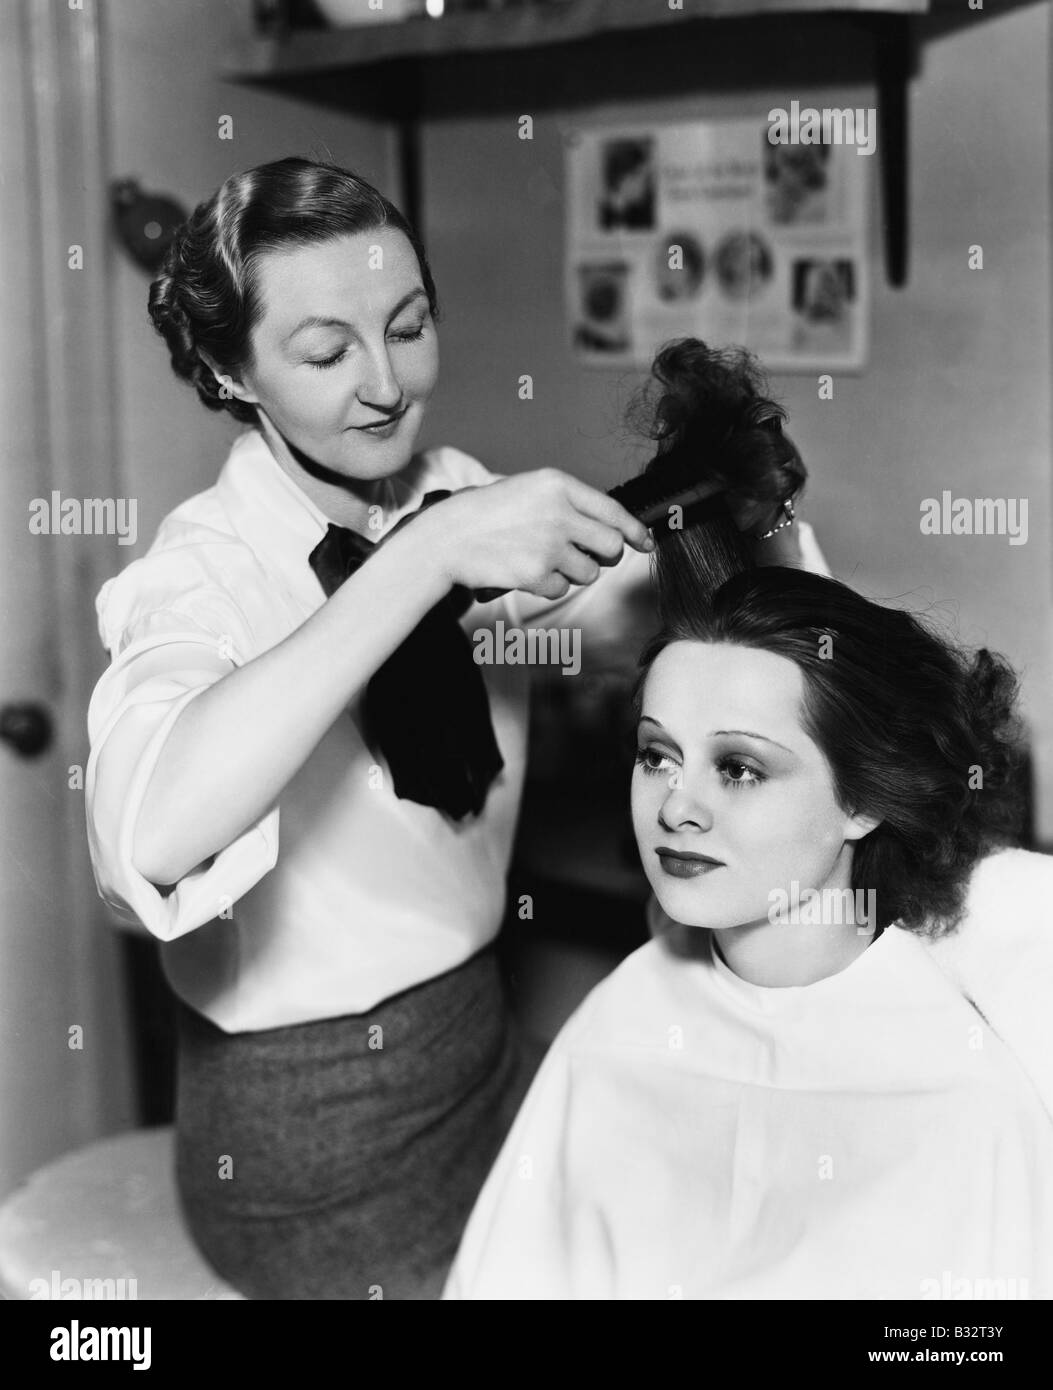 Young woman getting her done in a hair salon Stock Photo